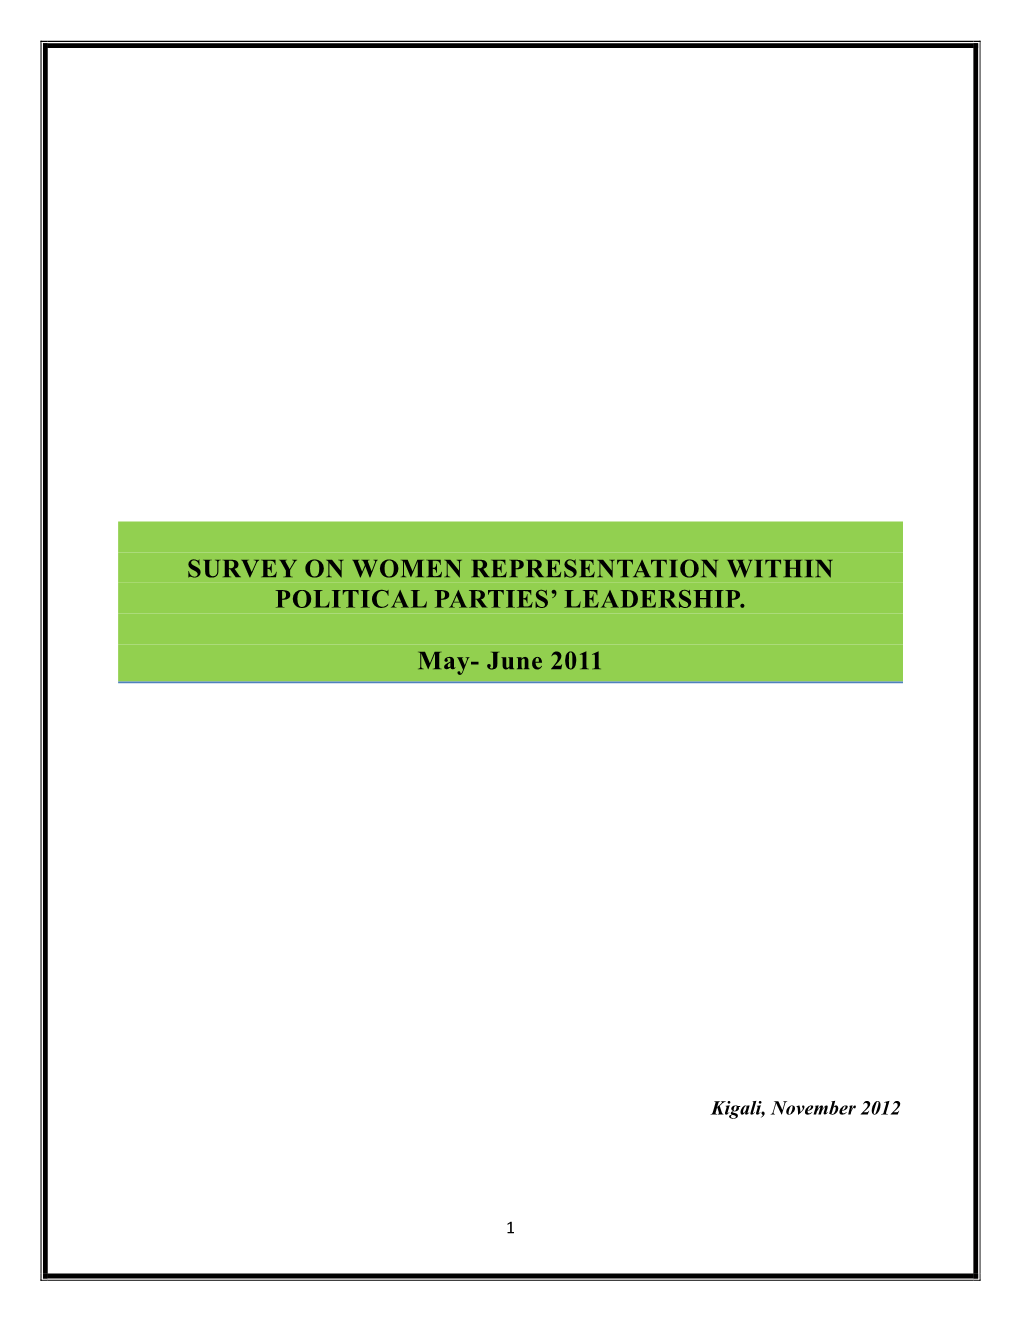 Survey on Women Representation Within Political Parties’ Leadership